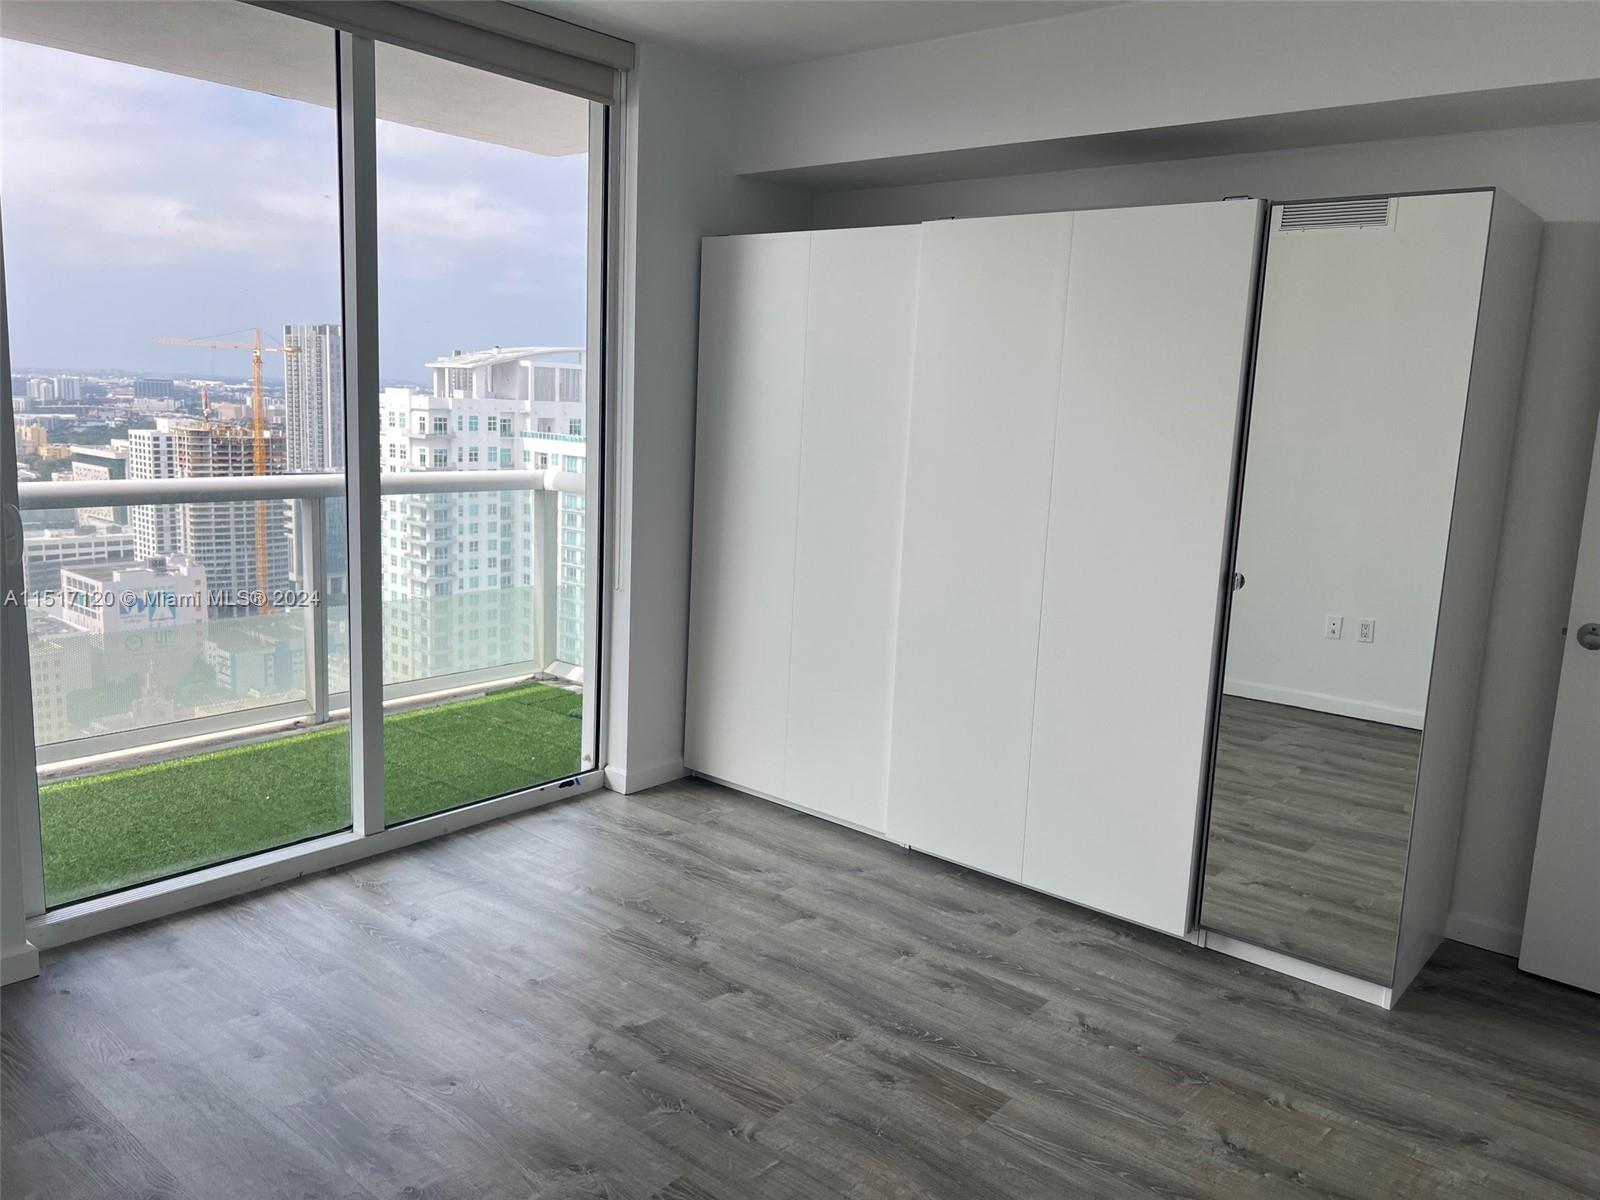 Available for Lease at 50 Biscayne Condominium, 1 Bedroom 1 Bath plus Den, Beautiful Panoramic views from the 47th Floor, Includes Internet/Cable with Building, Full Service Building with Gym, Pool, Spa, 24/7 Security/Valet. Amazing Location and Easy to Show. Long Term Lease only, 1 Year minimum Call LA for details and Showings.